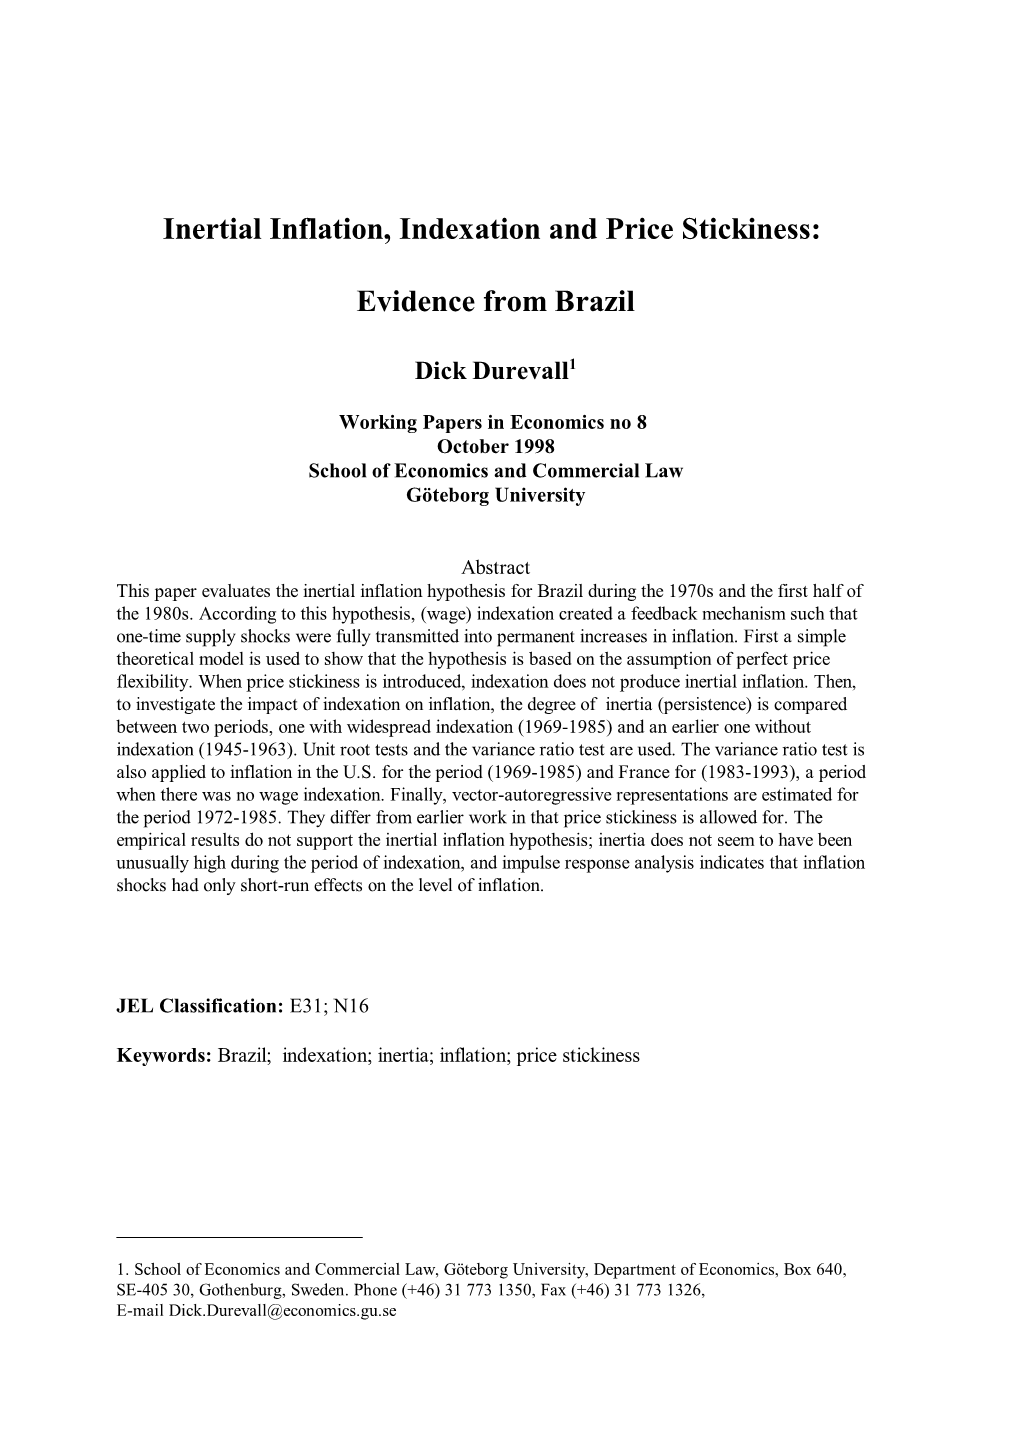 Inertial Inflation, Indexation and Price Stickiness: Evidence from Brazil